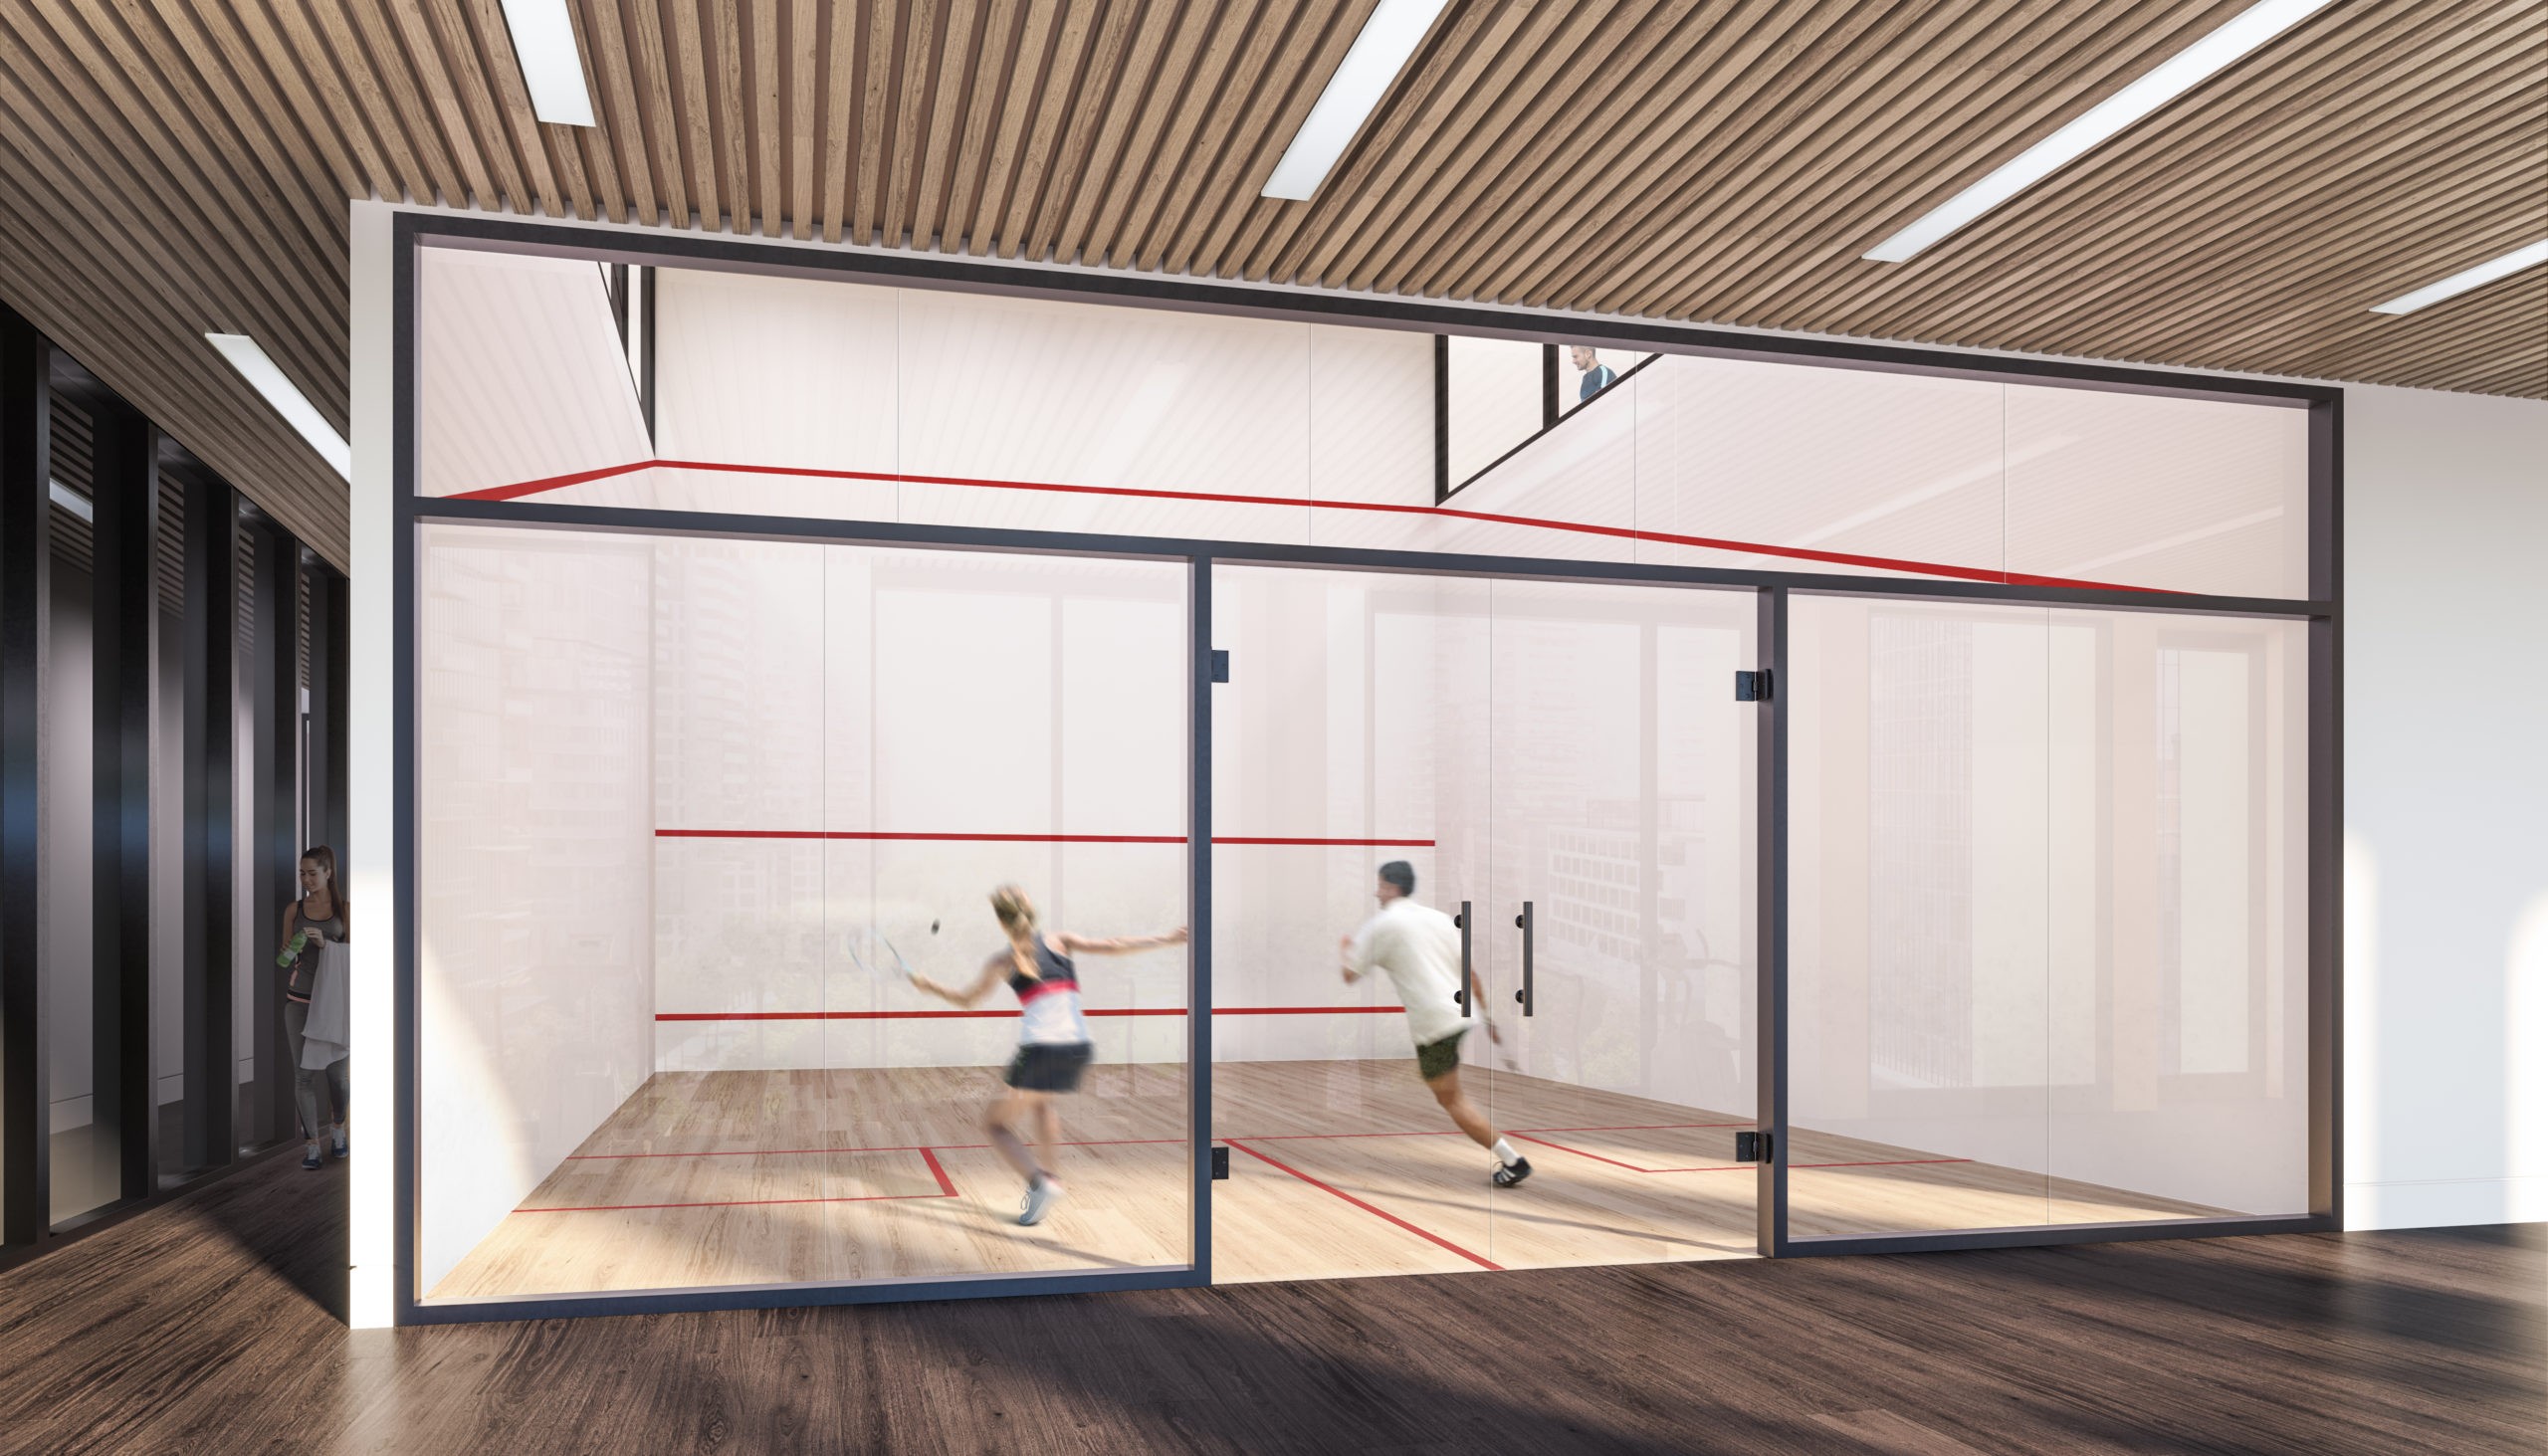 Transit City Amenity Centre in Toronto ON Fitness Amenity Centre Design Racketball court interior design by Cutler